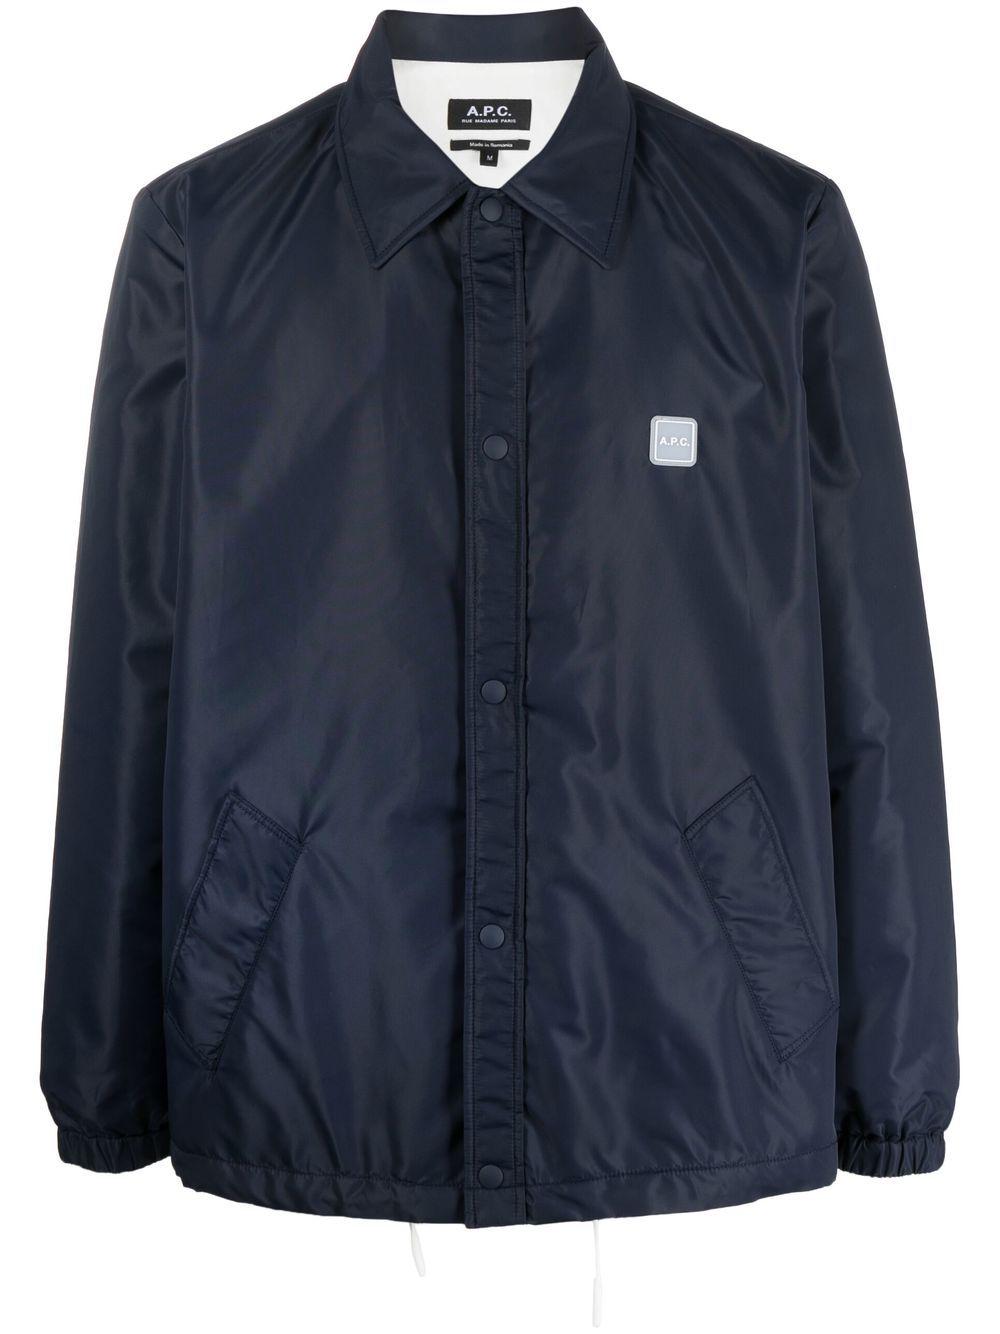 A.P.C. Padded Bomber Jacket in Blue for Men | Lyst